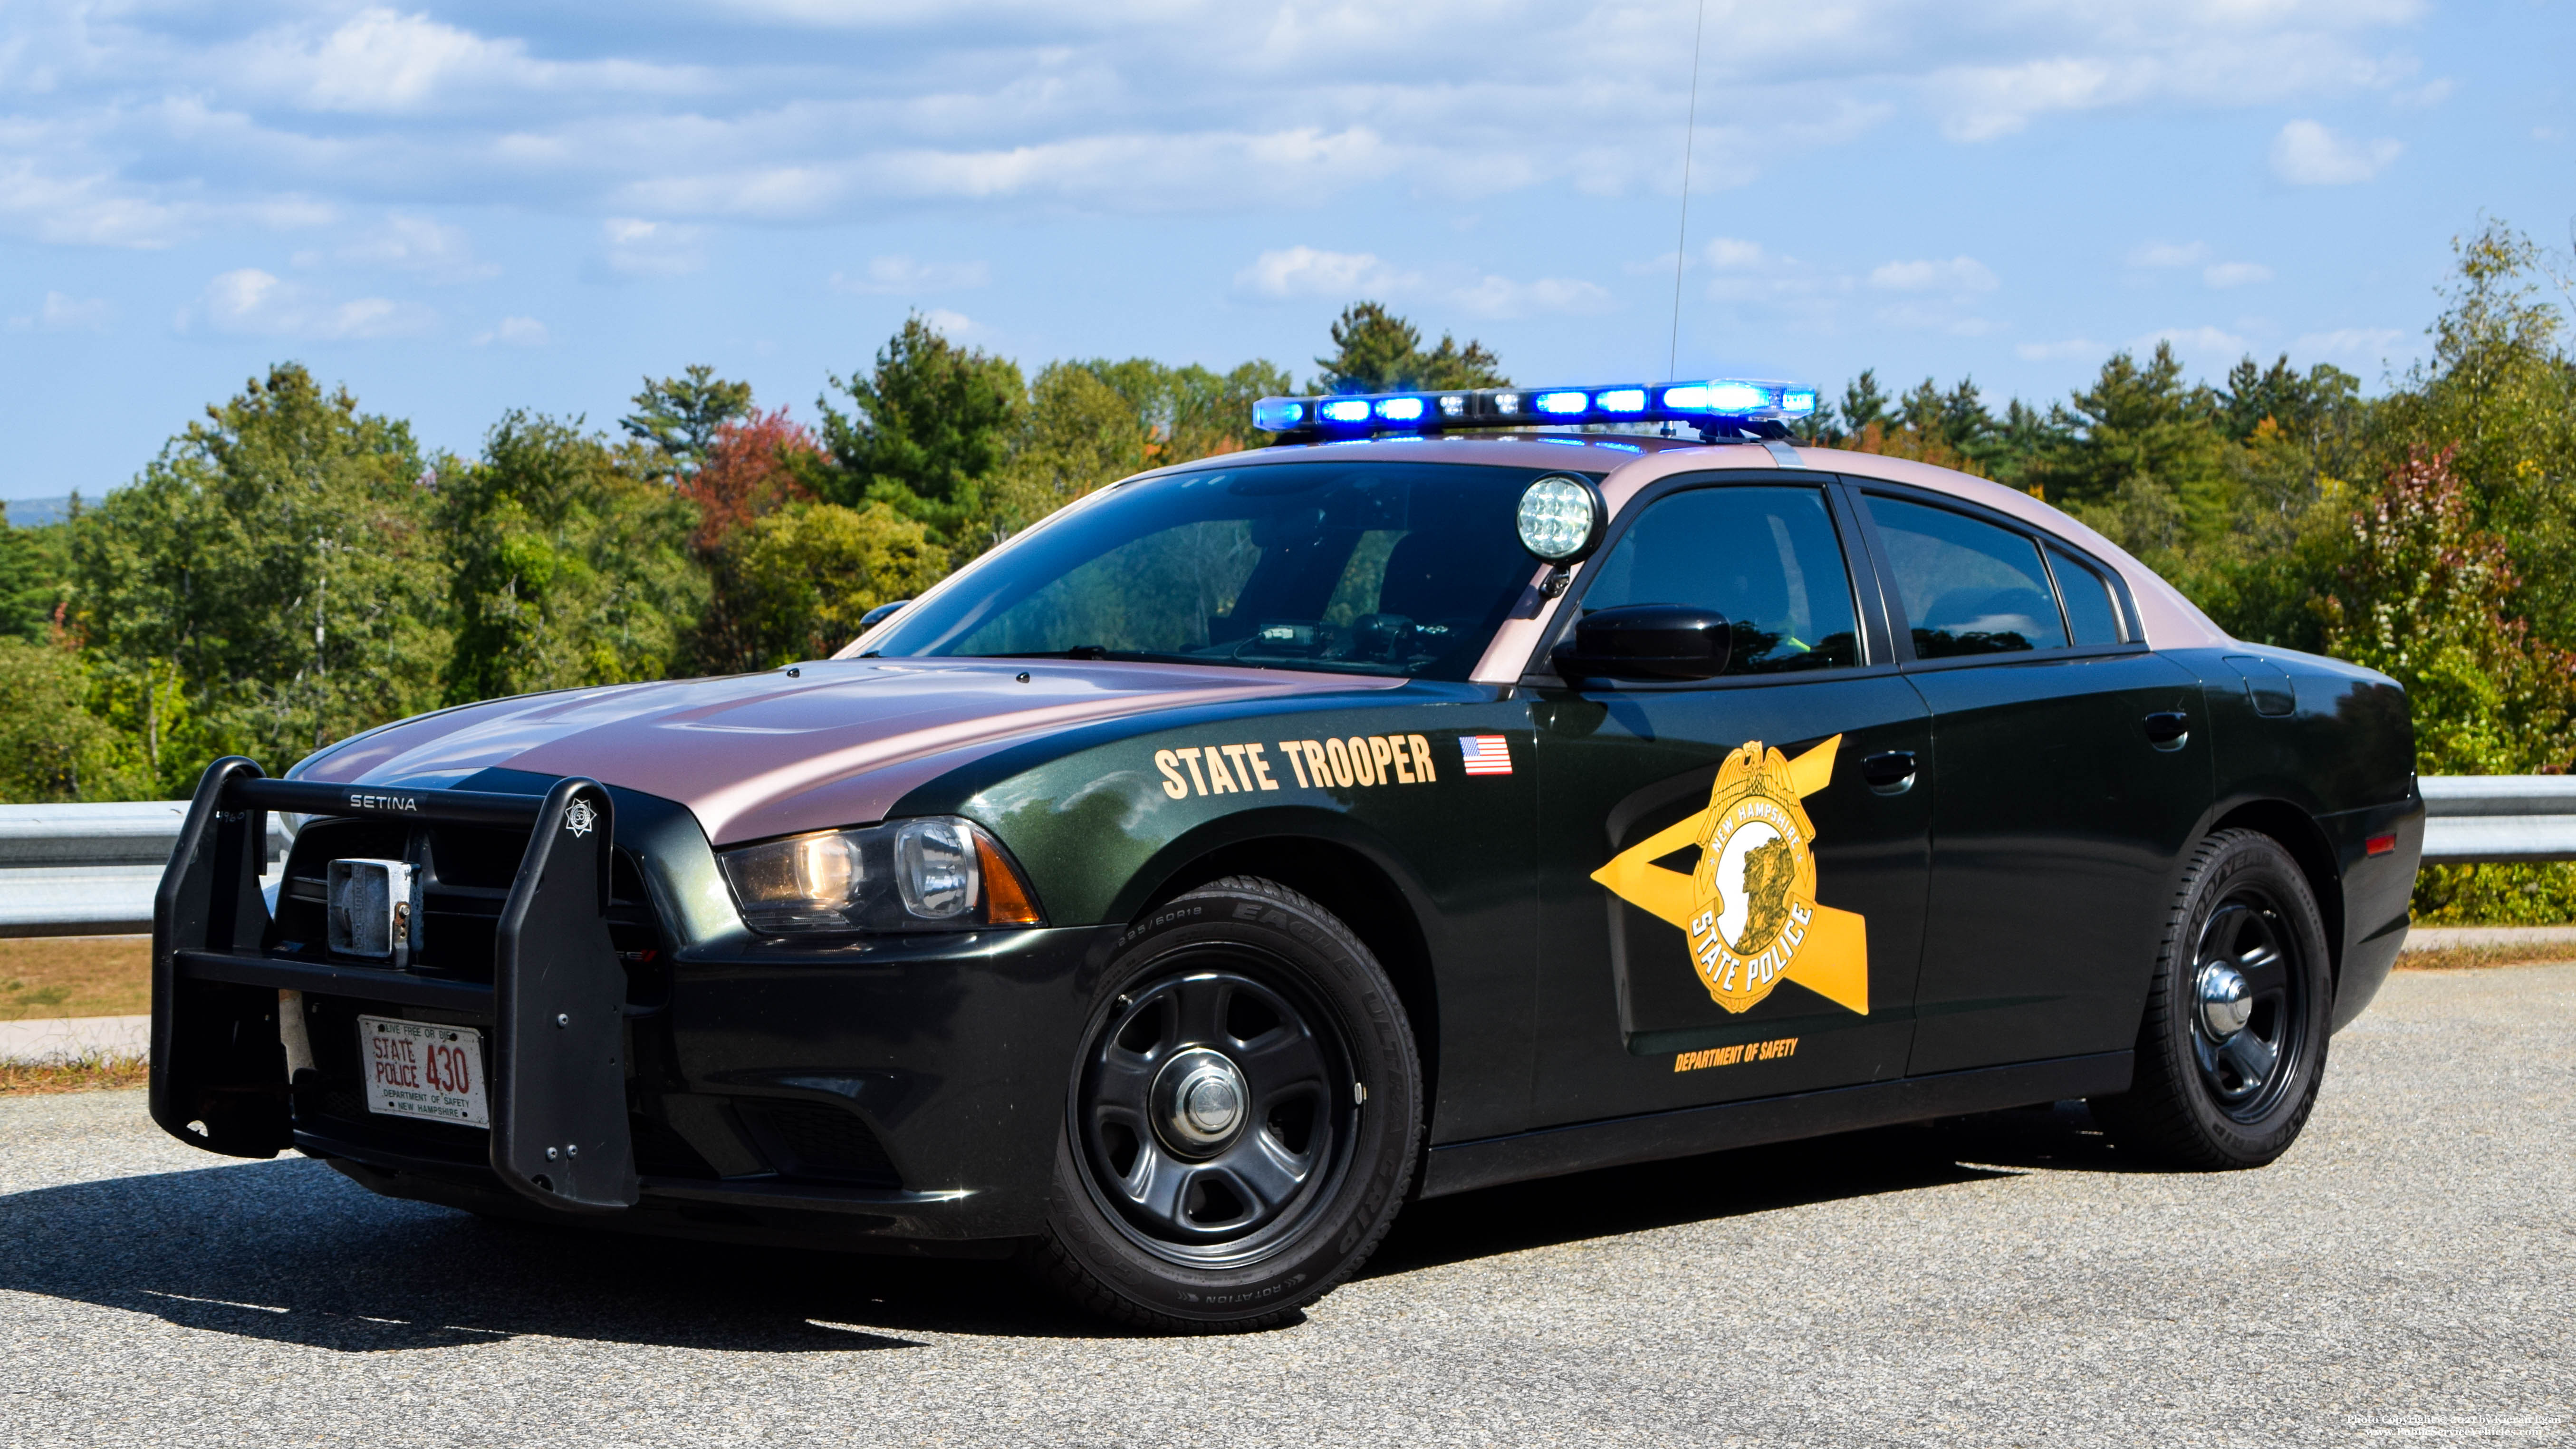 A photo  of New Hampshire State Police
            Cruiser 430, a 2011-2014 Dodge Charger             taken by Kieran Egan